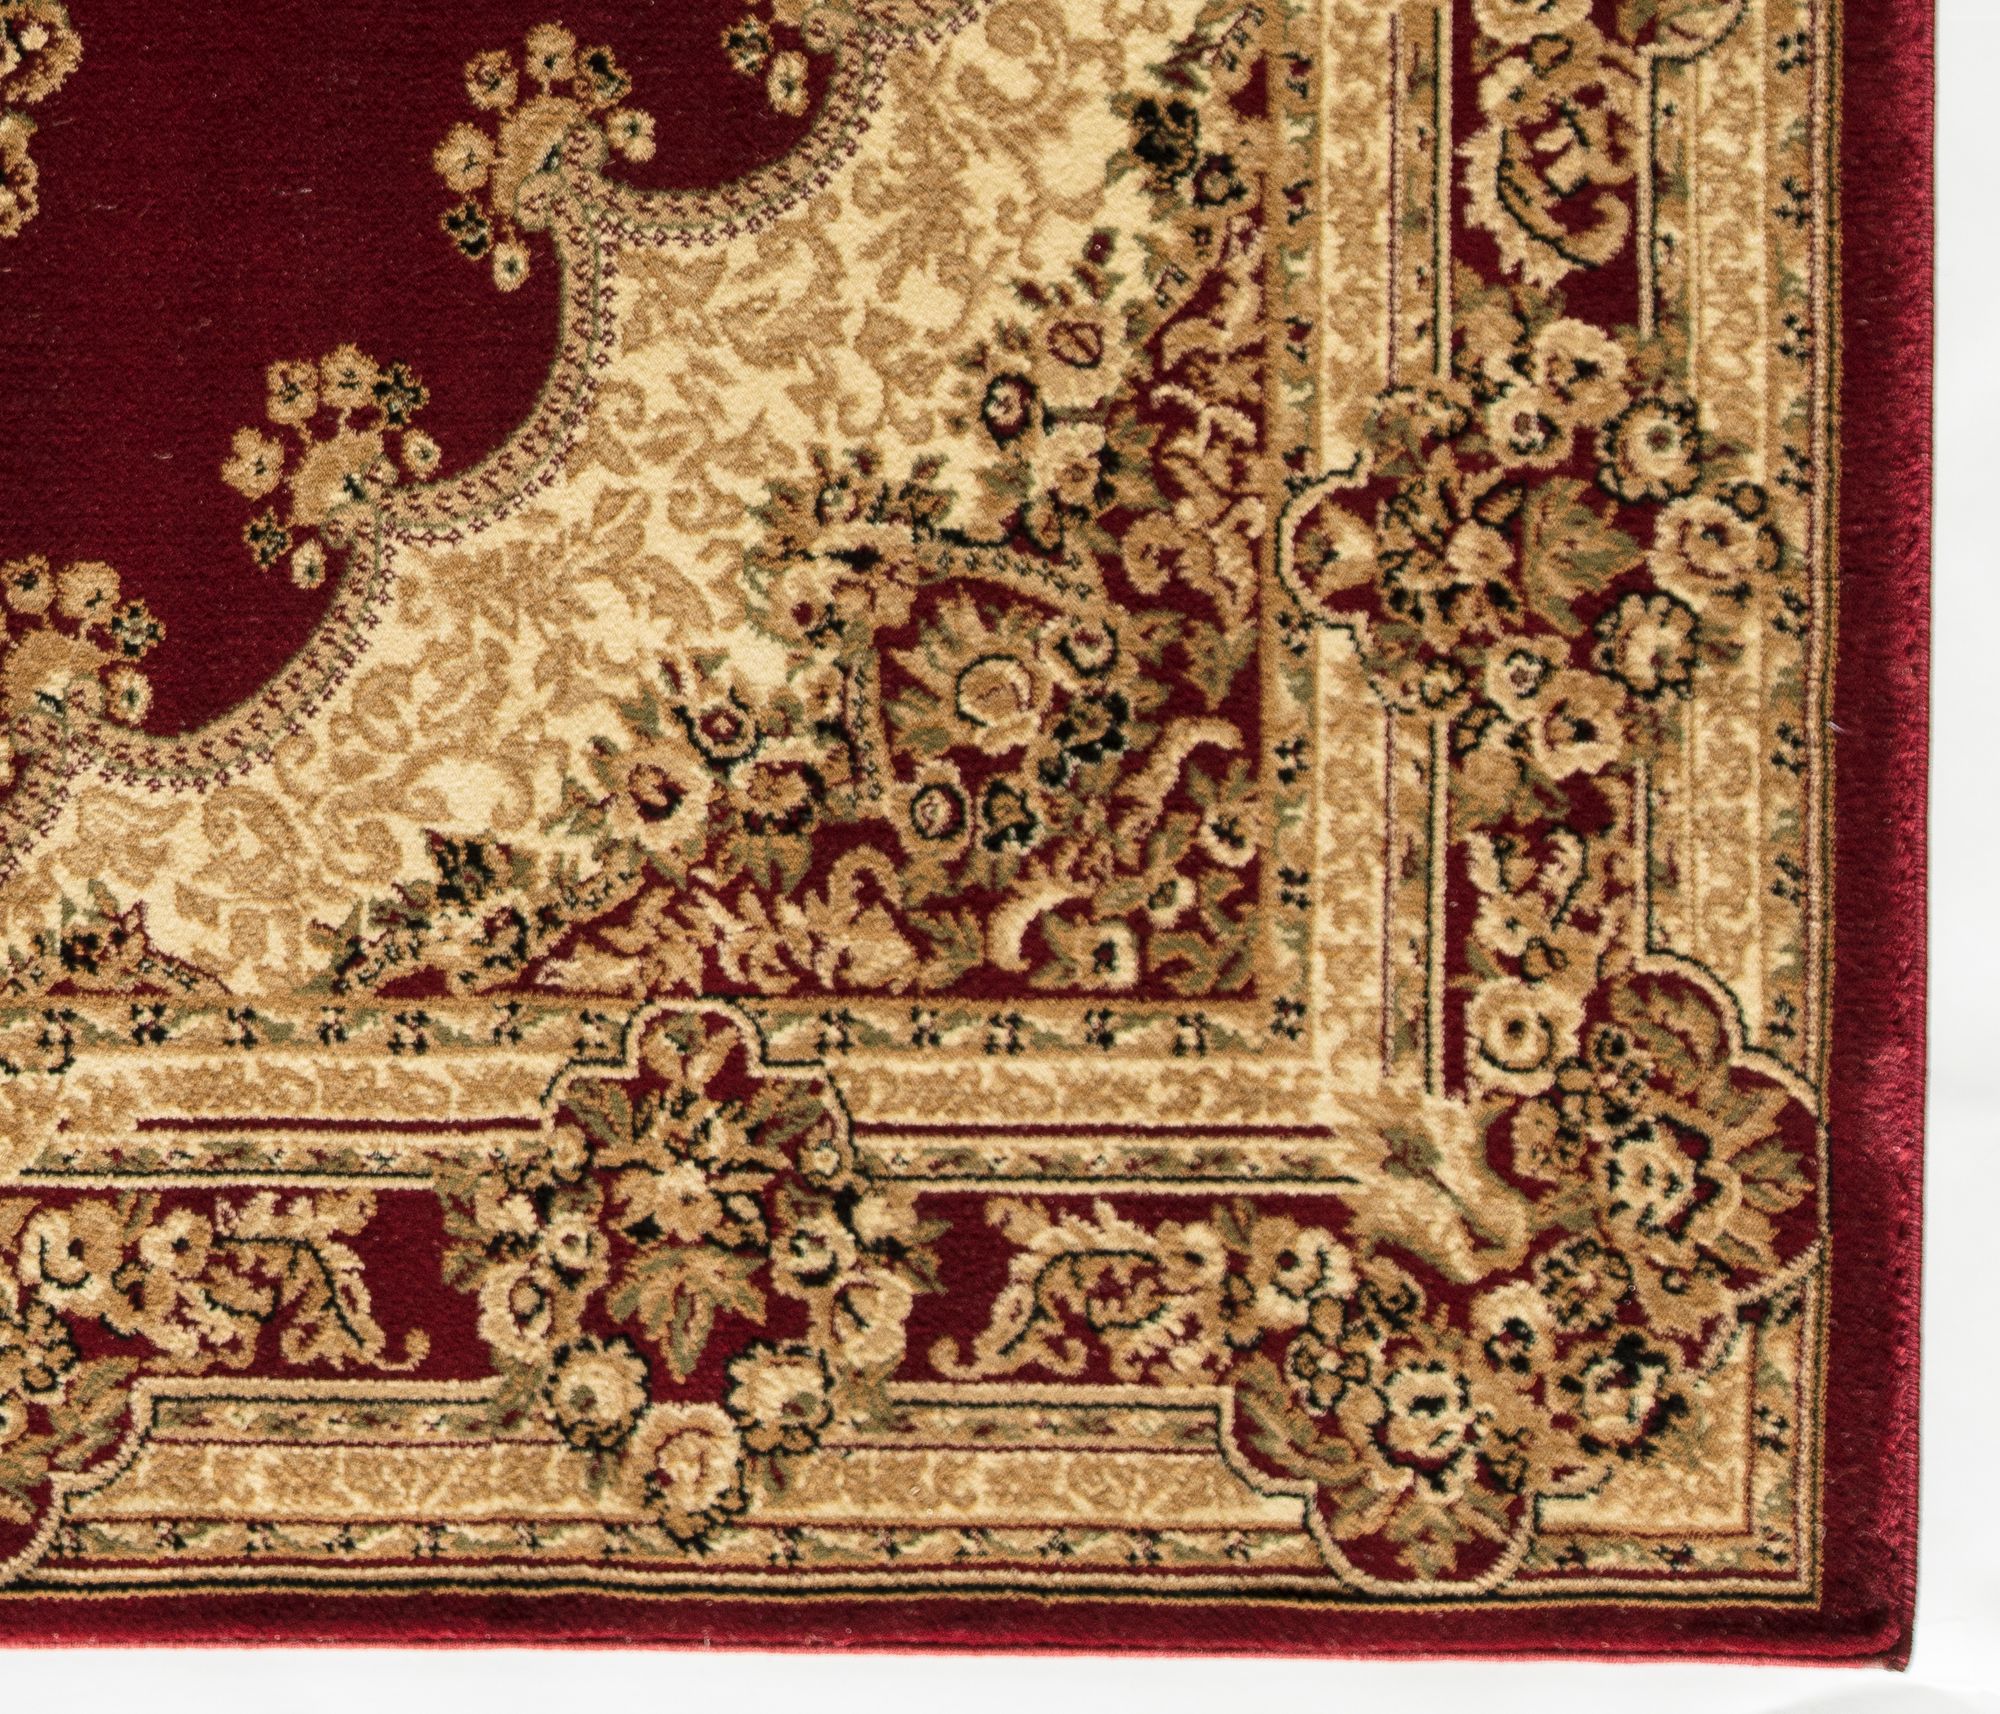 Rugs America Vista 807-RED Kerman Red Oriental Traditional Red Area Rug, 3'11"x5'3" - image 5 of 5